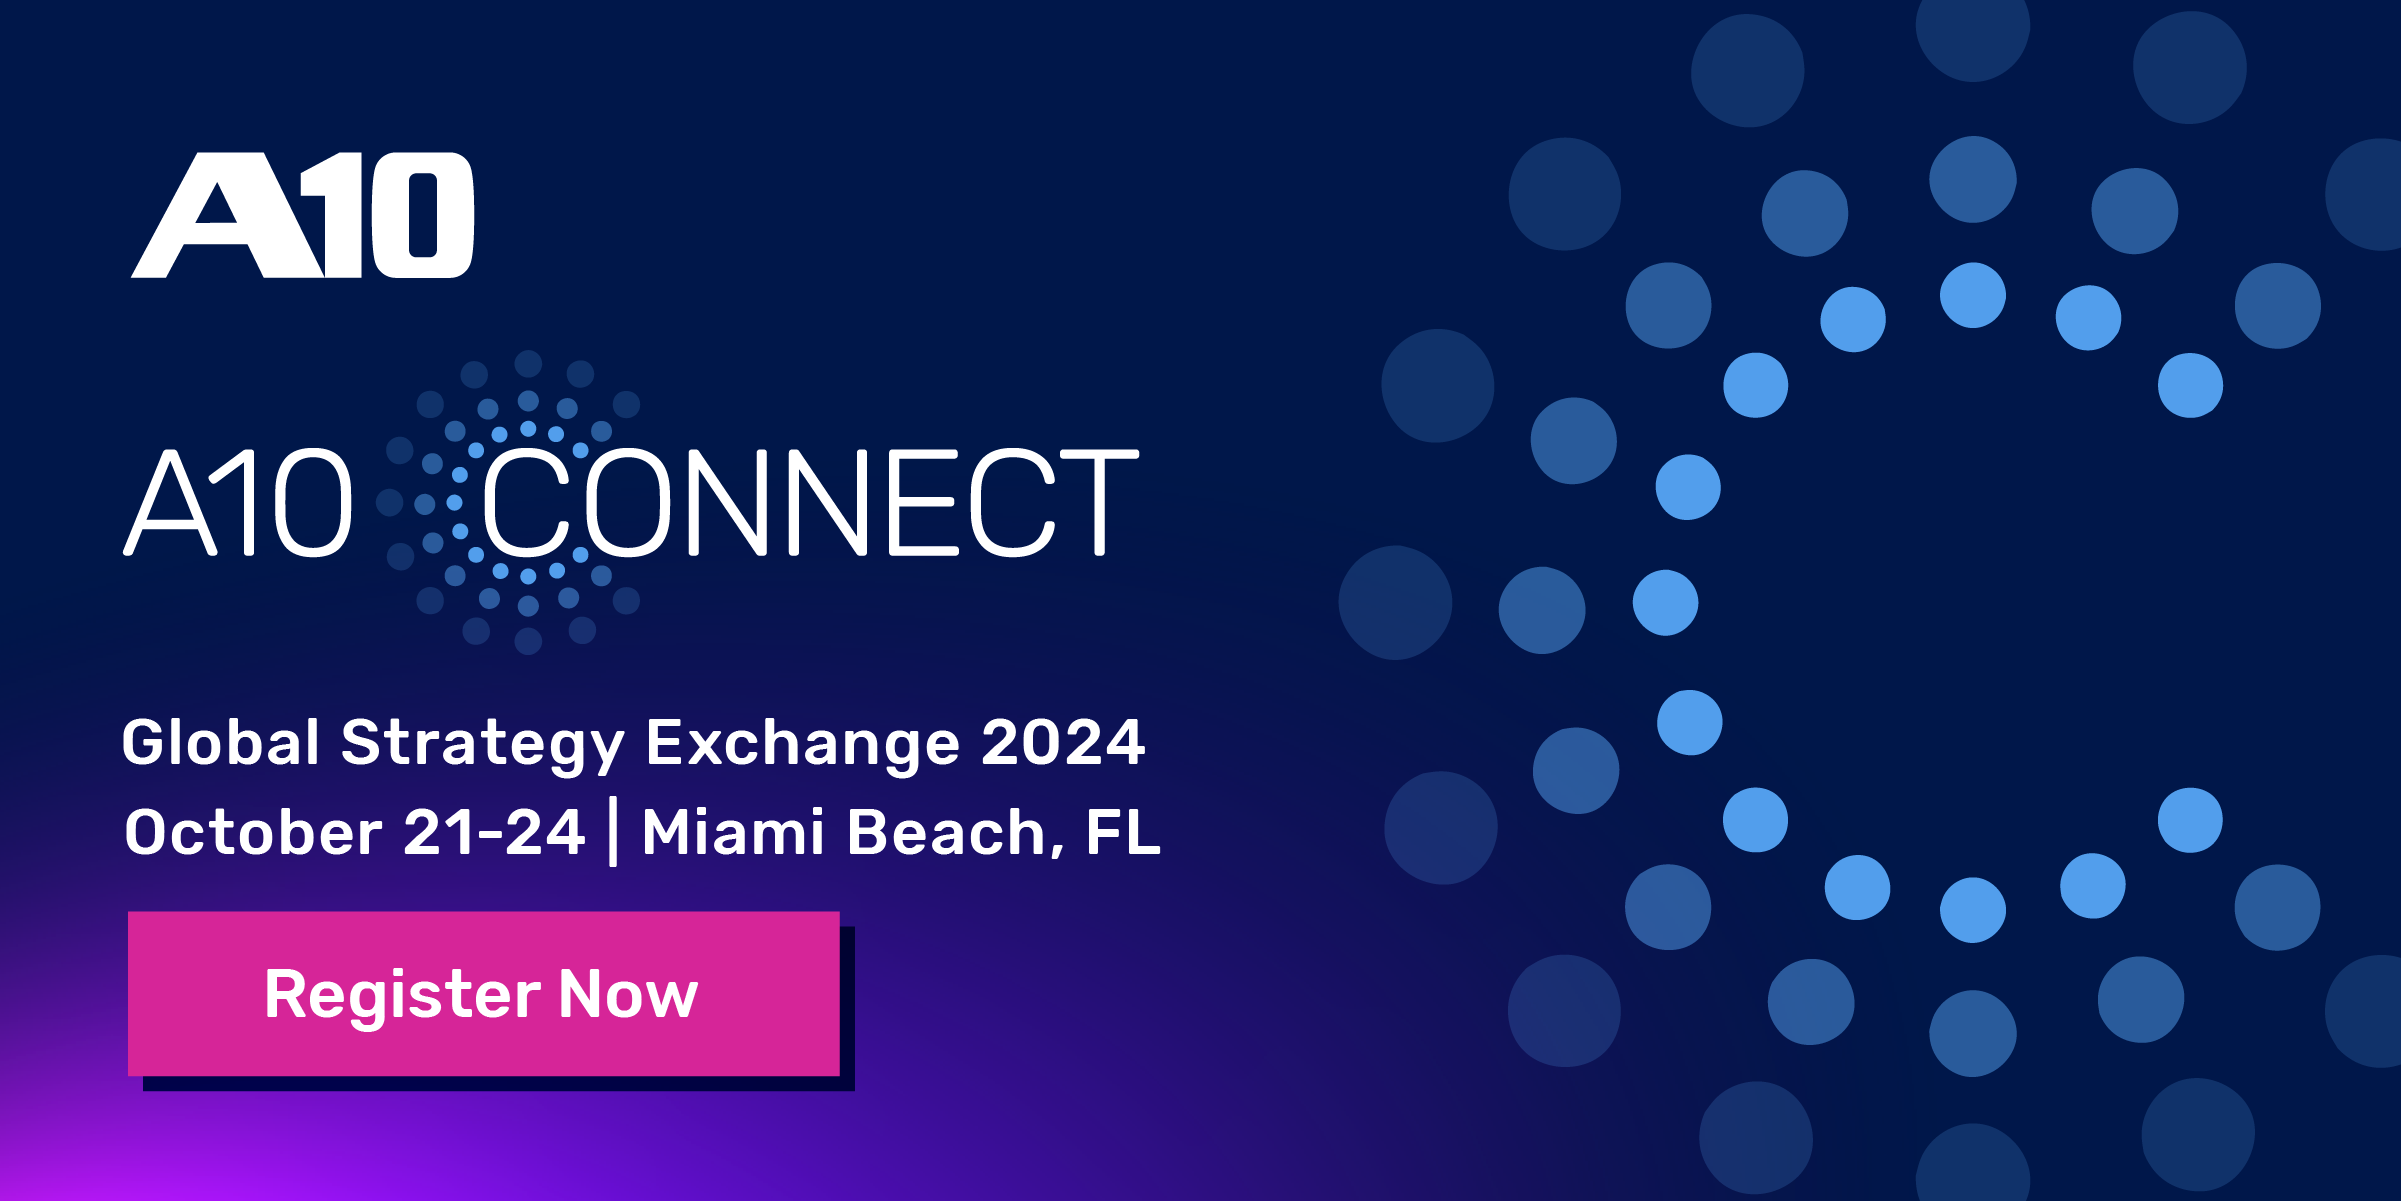 A10 Connect: Global Strategy Exchange 2024